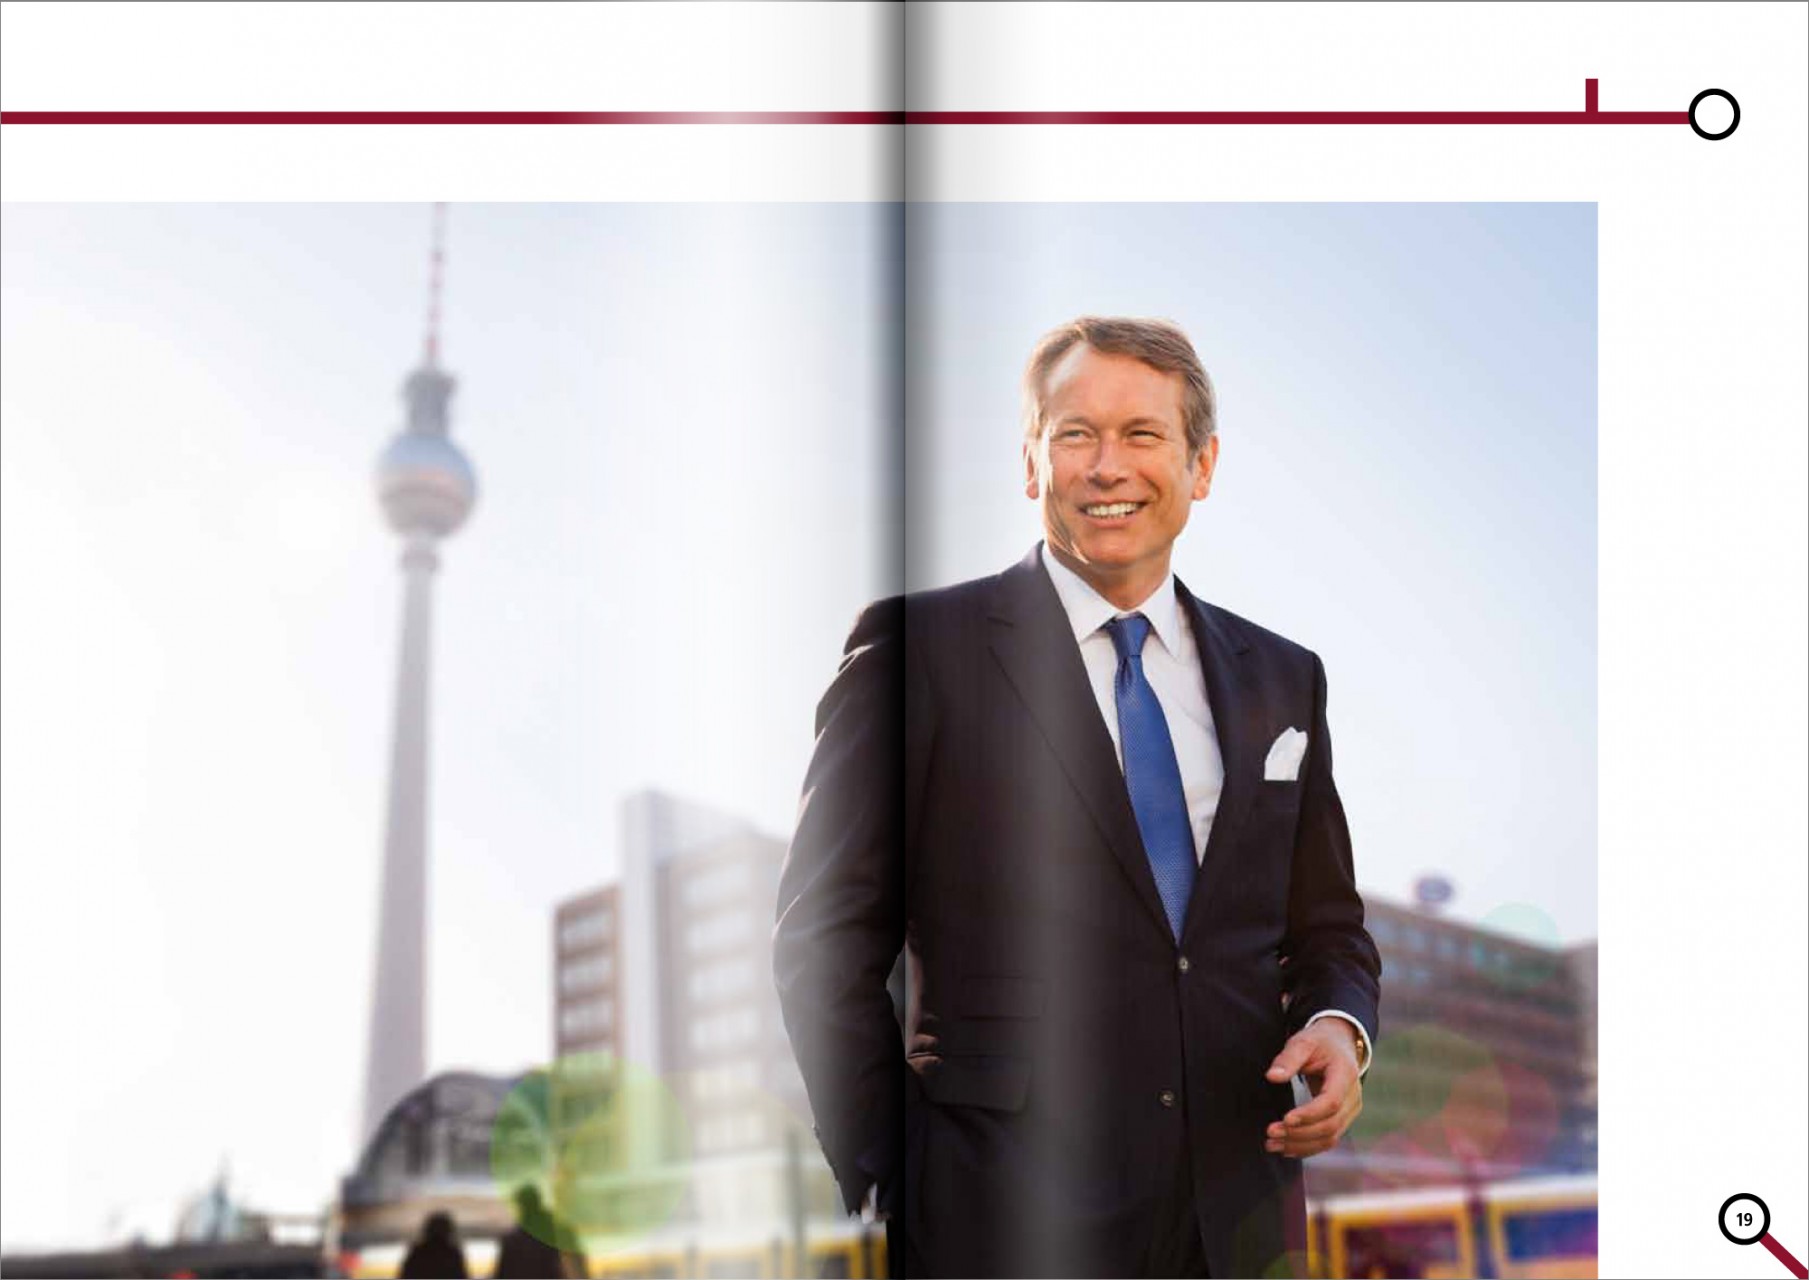 BVG Annual Report